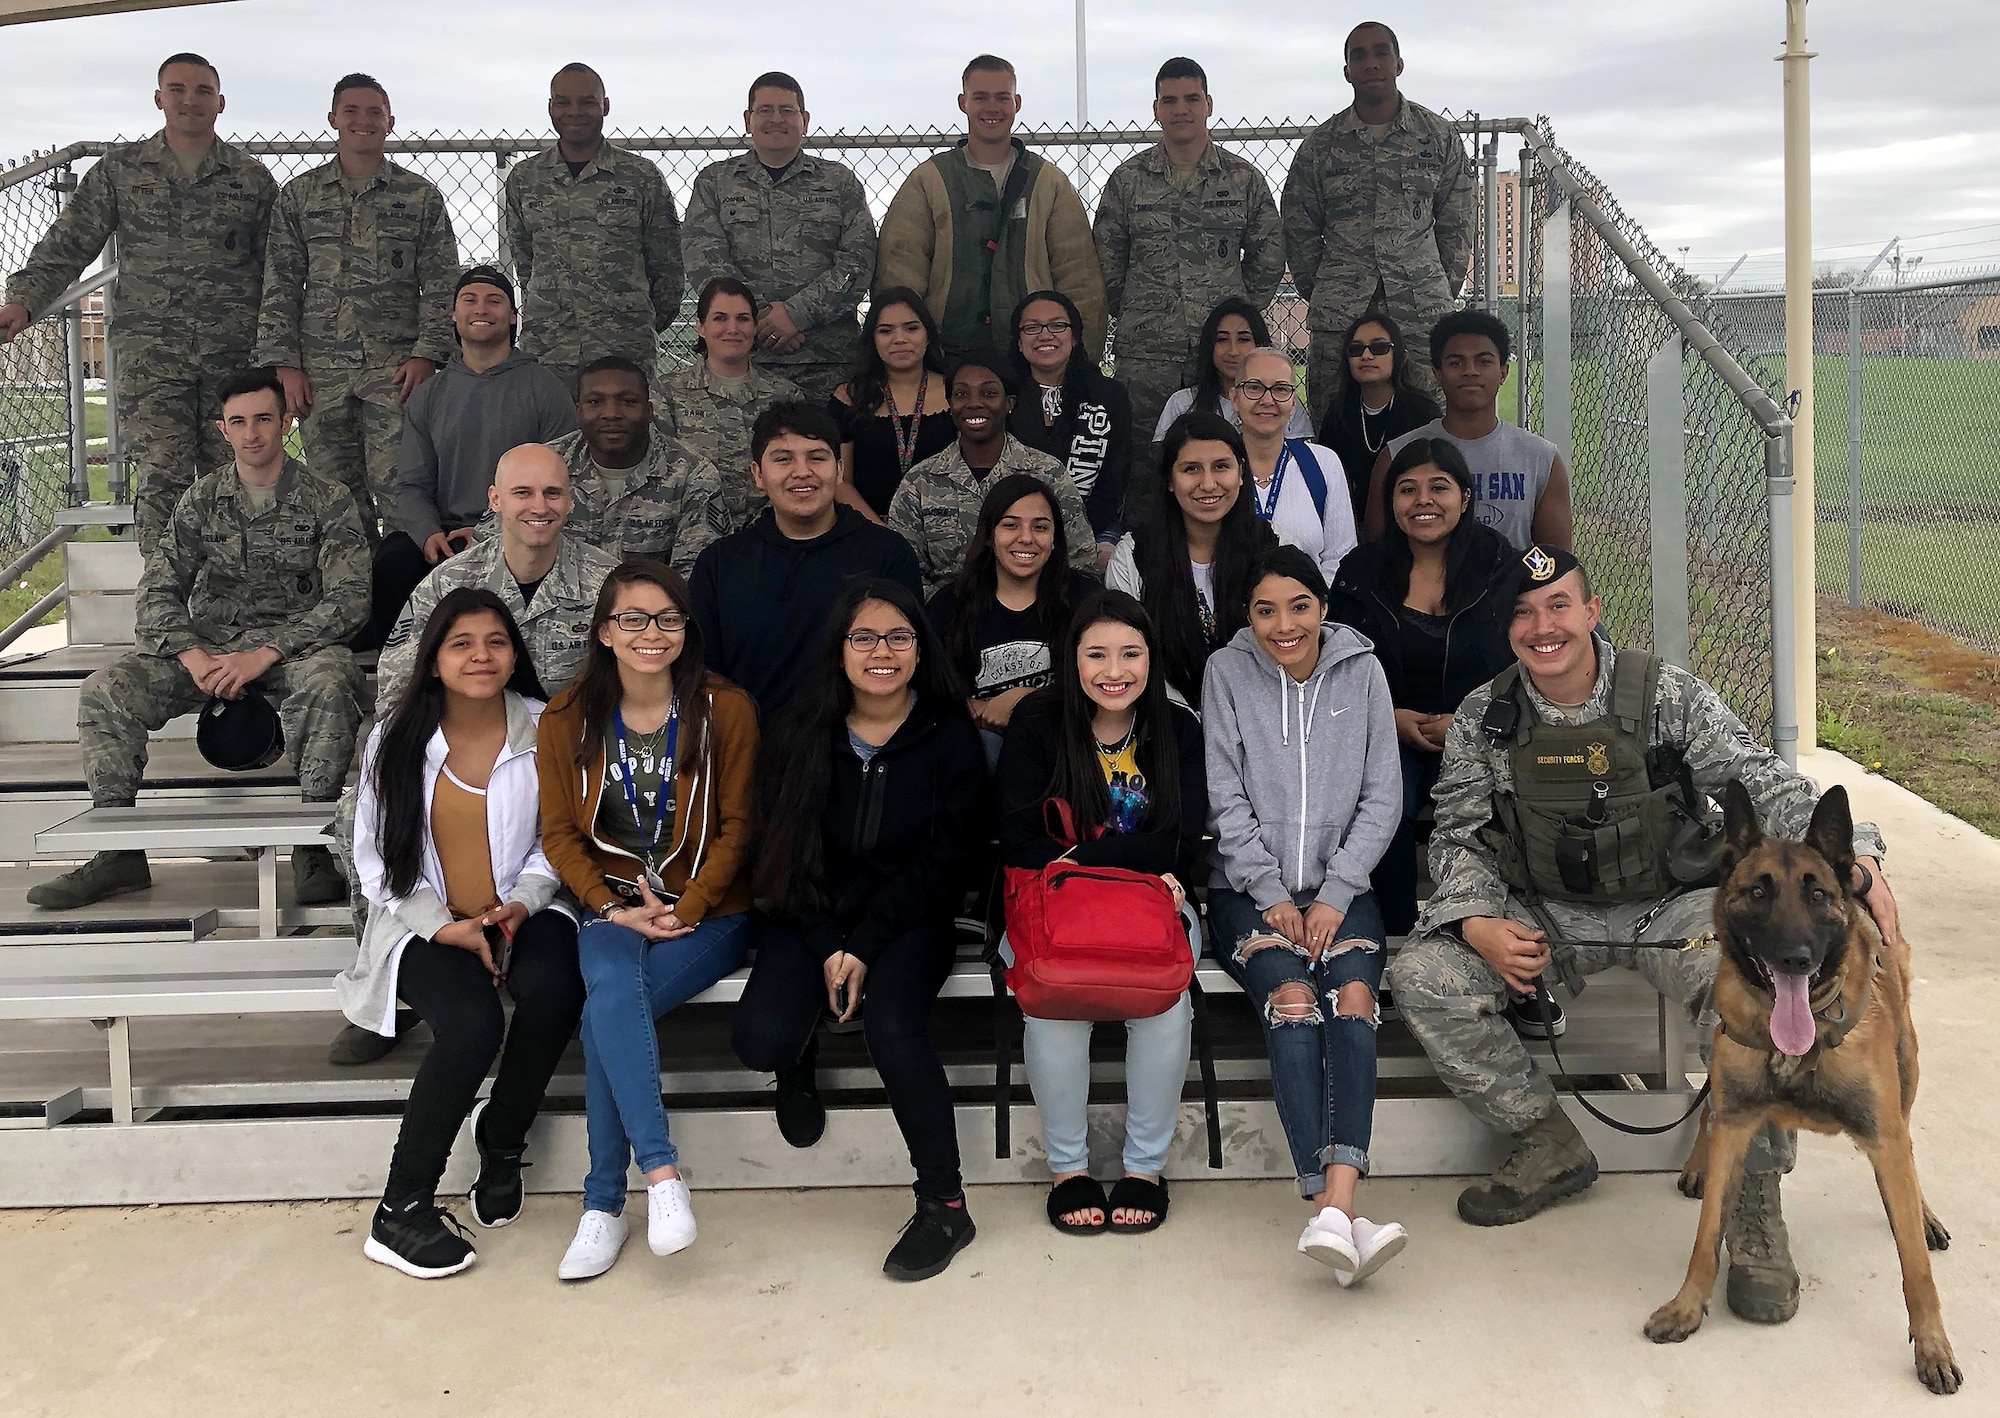 South San Antonio High School students and Joint Base San Antonio-Lackland Airmen pose for a photo during a Troops for Teens event at JBSA-Lackland, Texas, March 9, 2018. Troops for Teens, a joint SSAHS and Air Forces Cyber volunteer program, links Airmen mentors with teens. (U.S. Air Force photo by Tech. Sgt. Jamie Adimora)